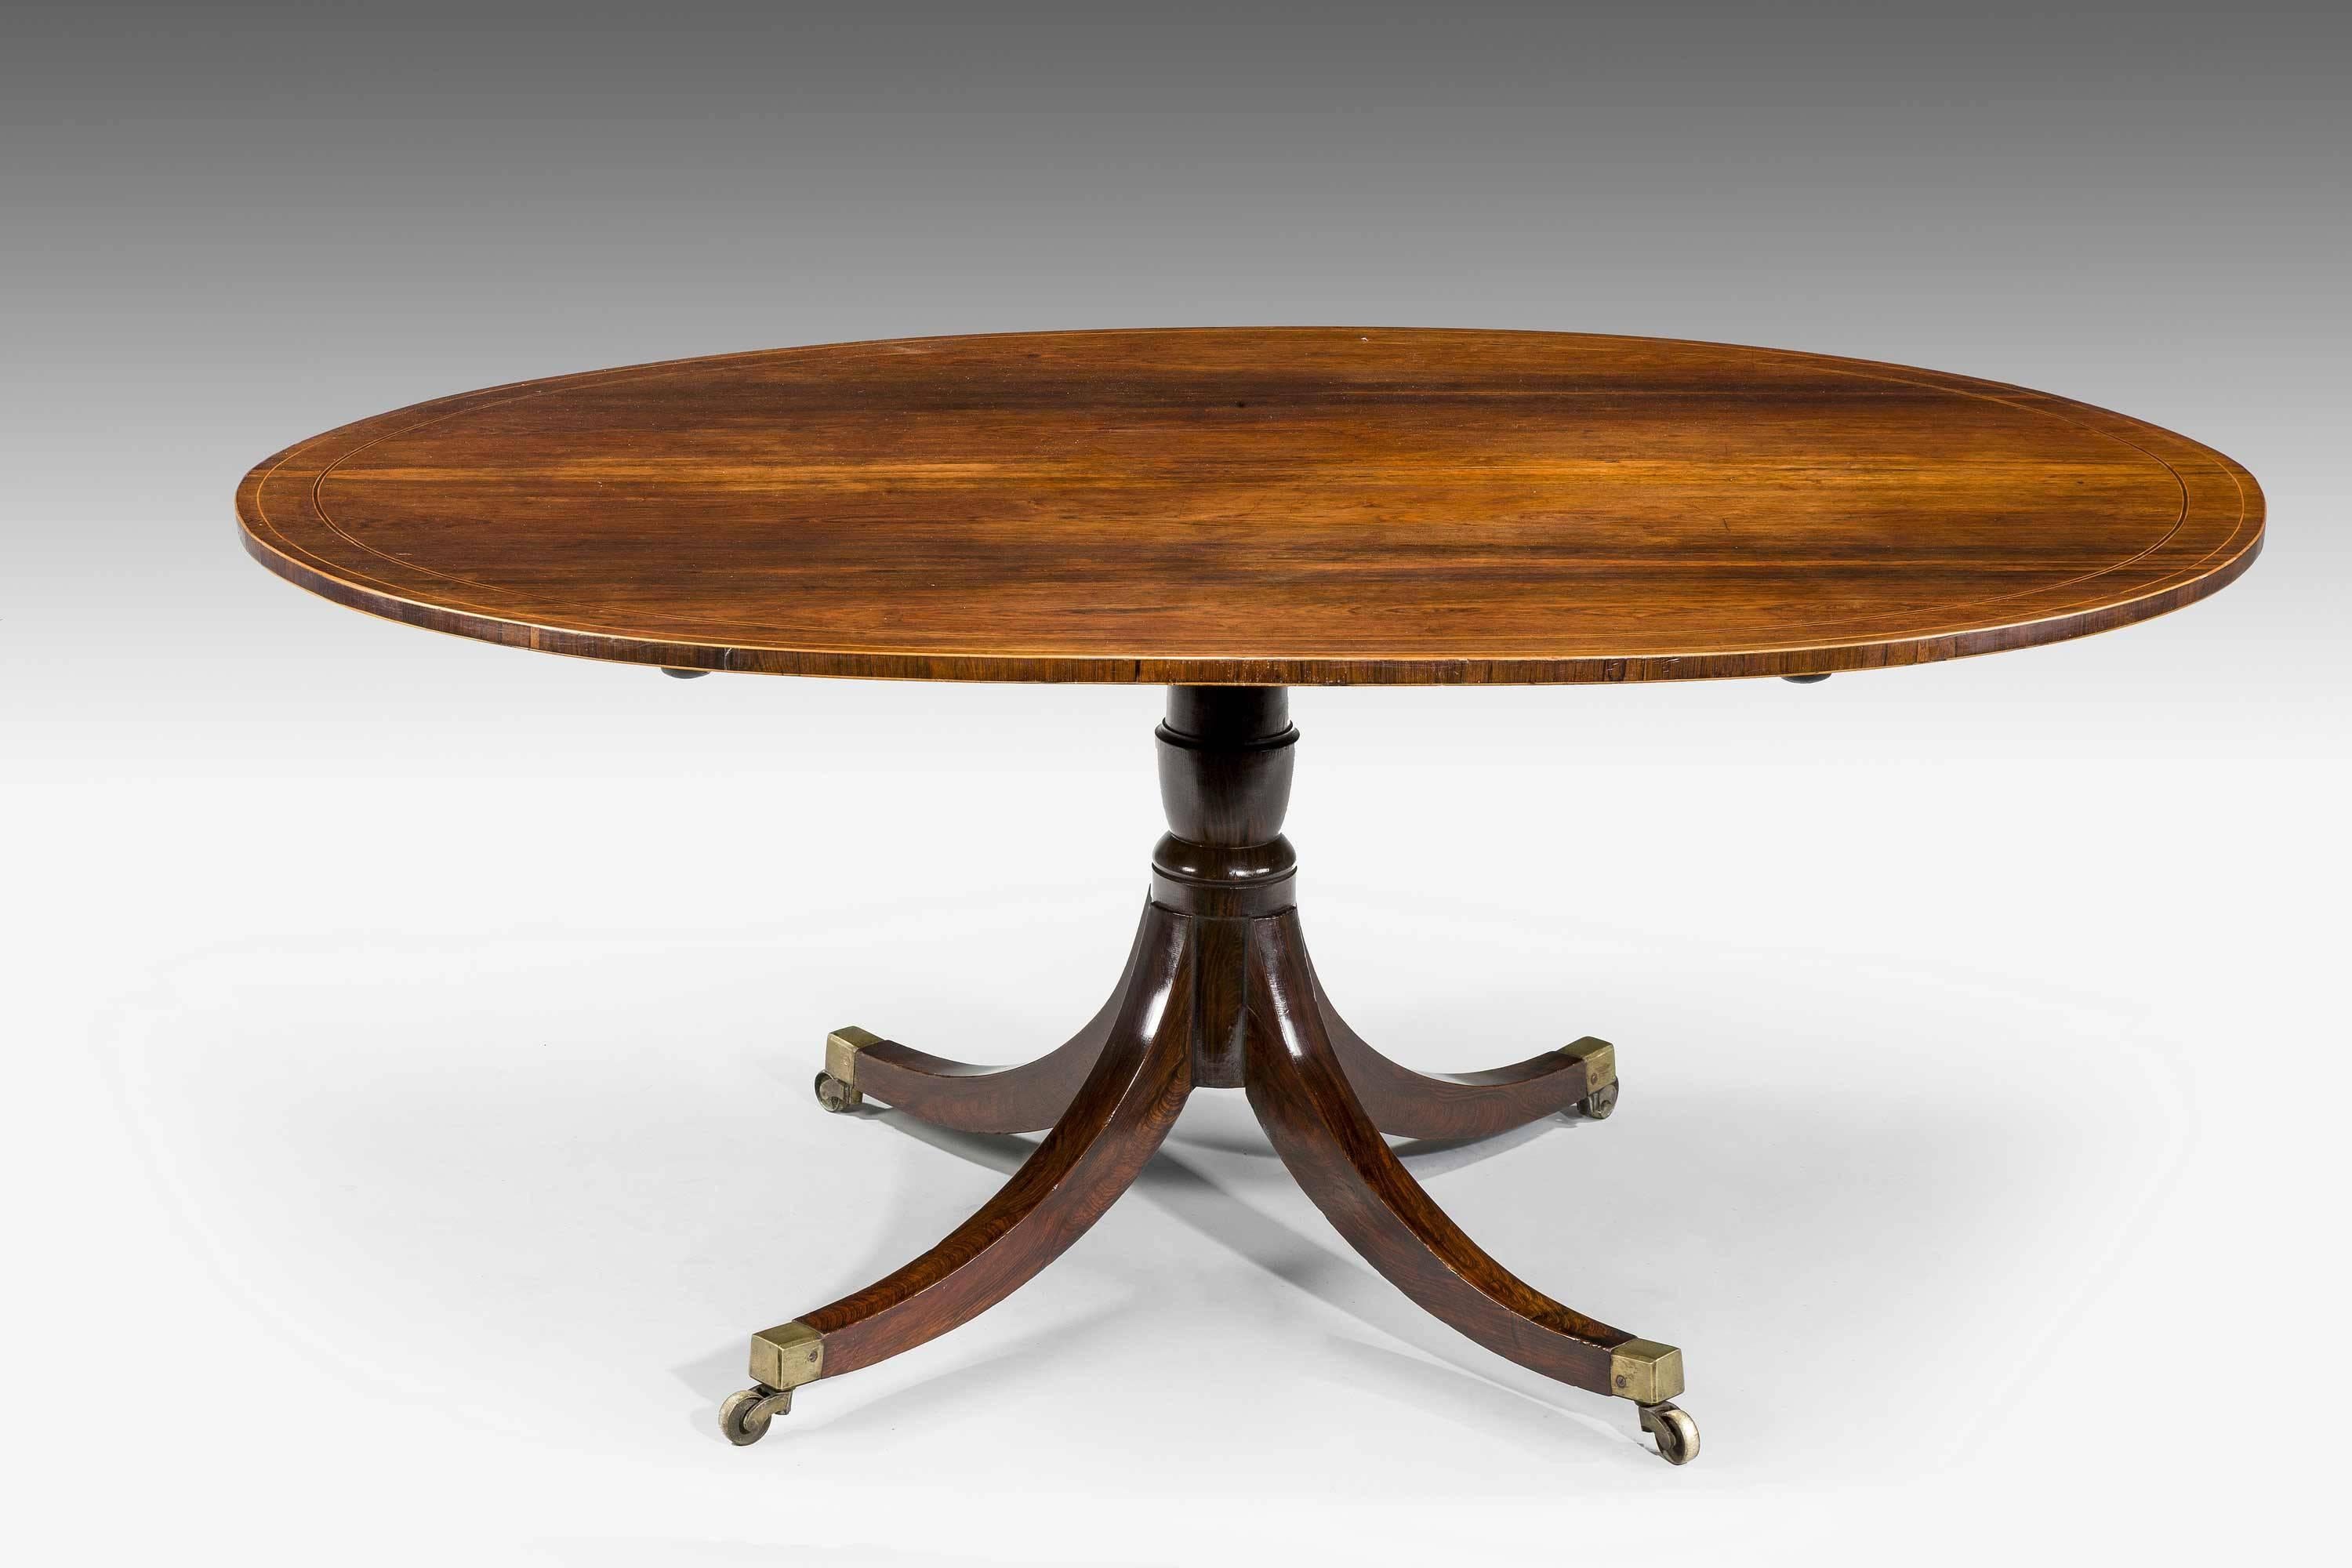 George III period mahogany oval dining table of very good colour and patina, the top with fine line banding the support over four square section swept legs. Original shoes and castors.